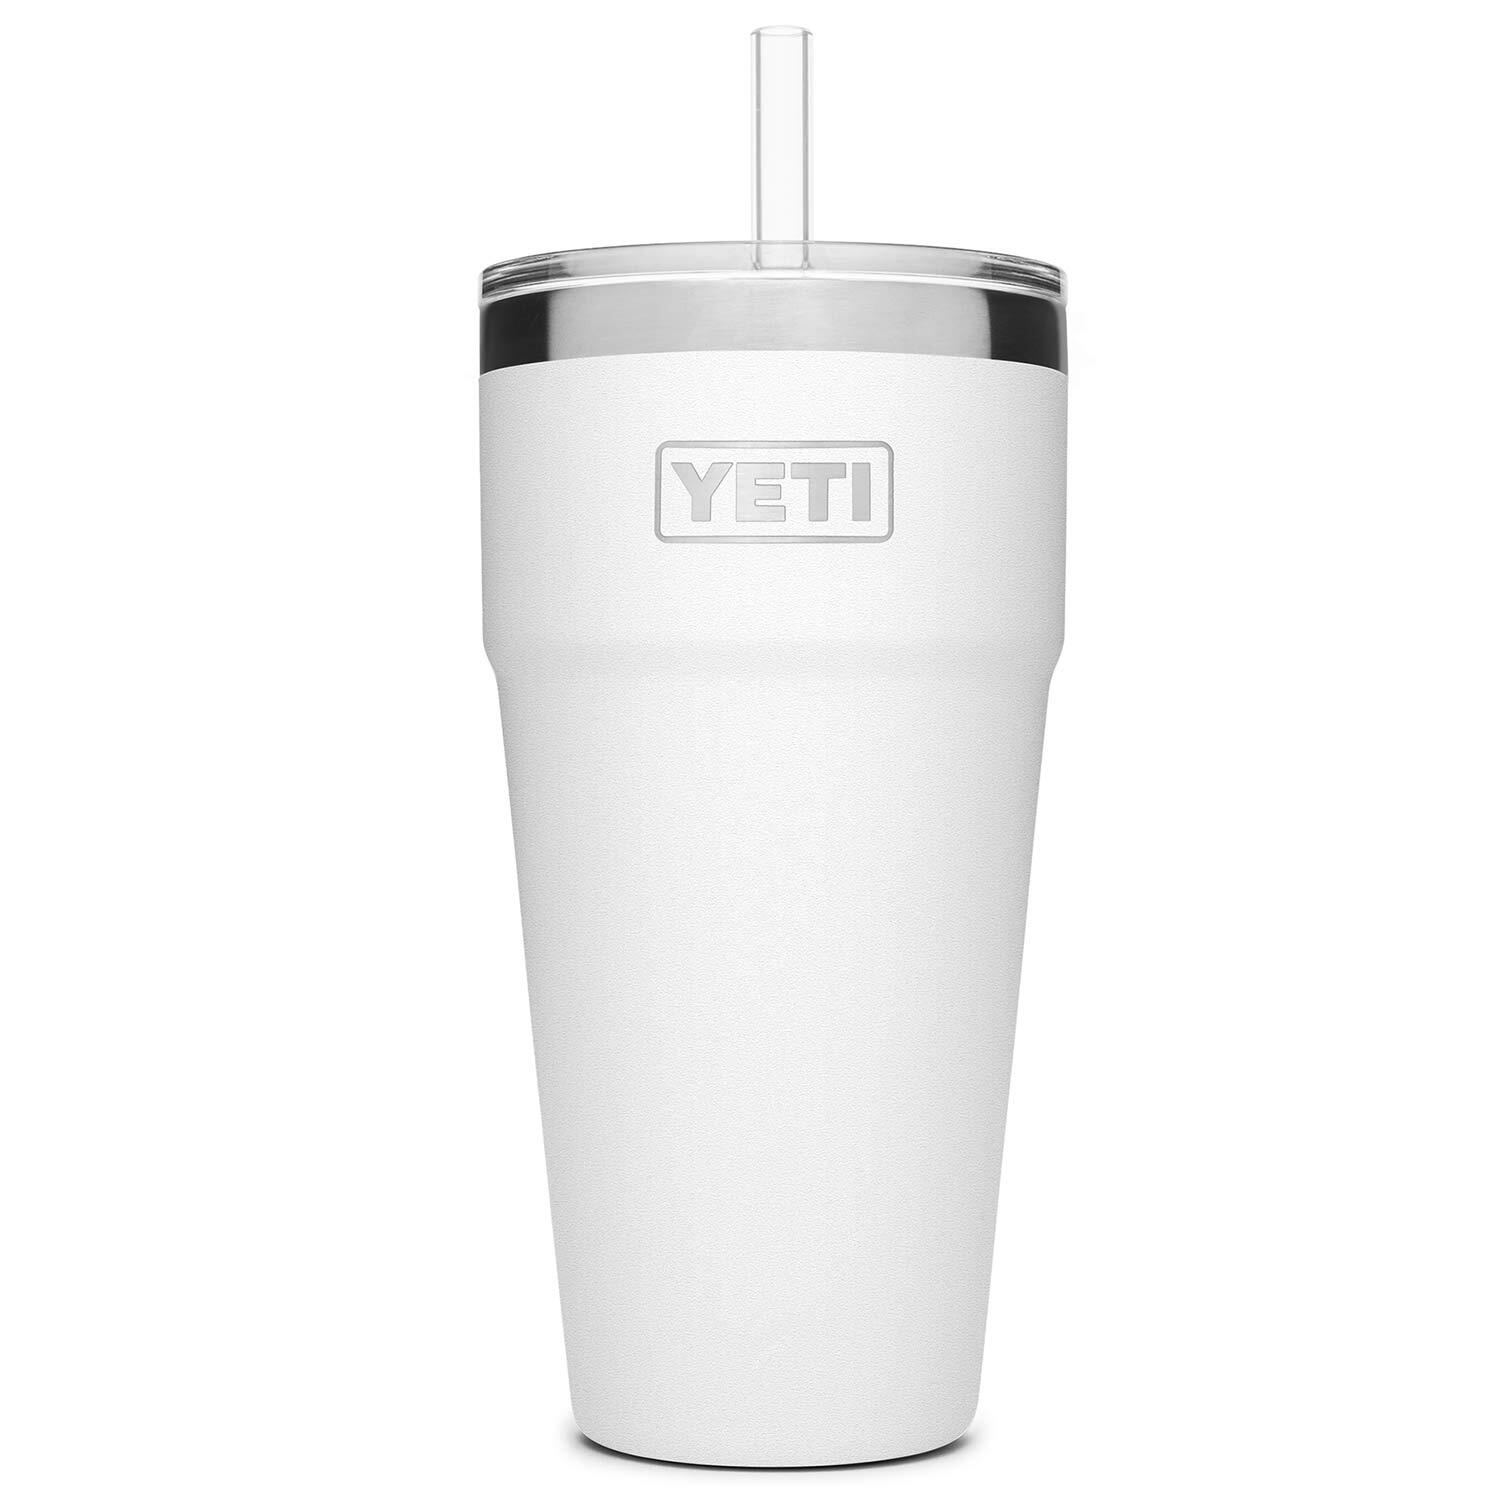 YETI Rambler 26 oz Straw Cup, Vacuum Insulated, Stainless Steel with Straw  Lid, Nordic Purple